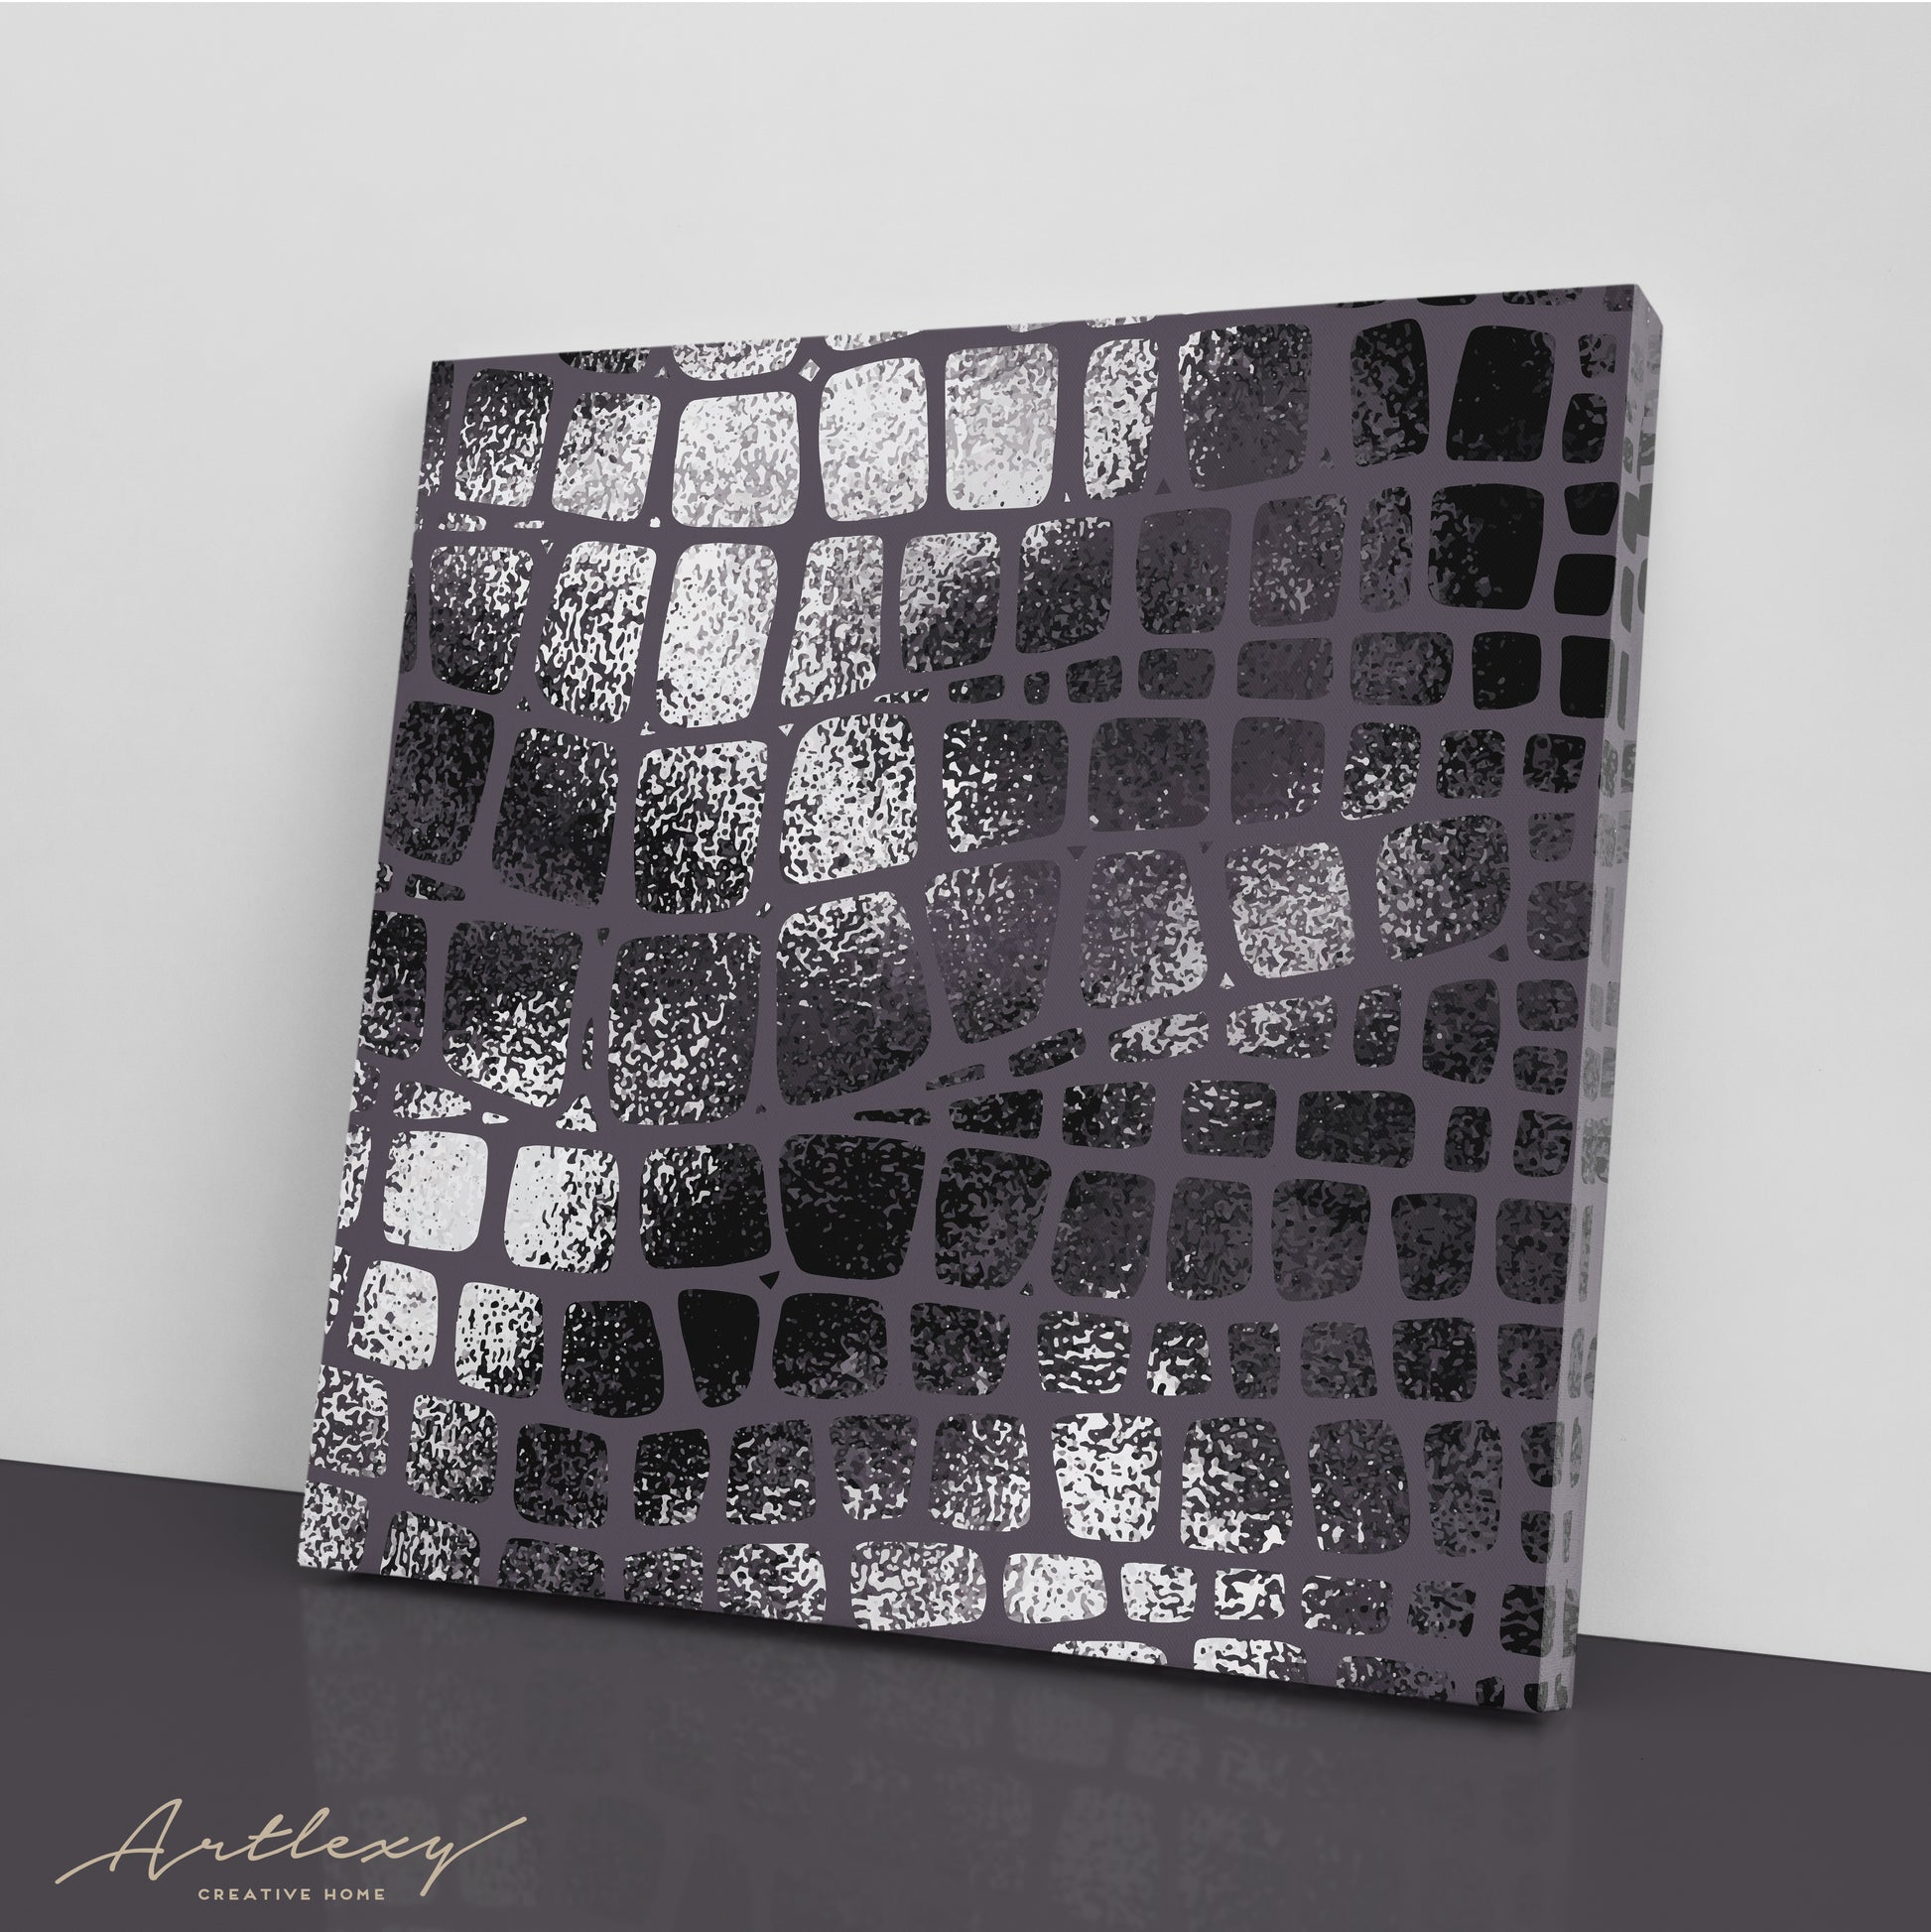 Abstract Metallic Snake Skin Canvas Print ArtLexy 1 Panel 12"x12" inches 